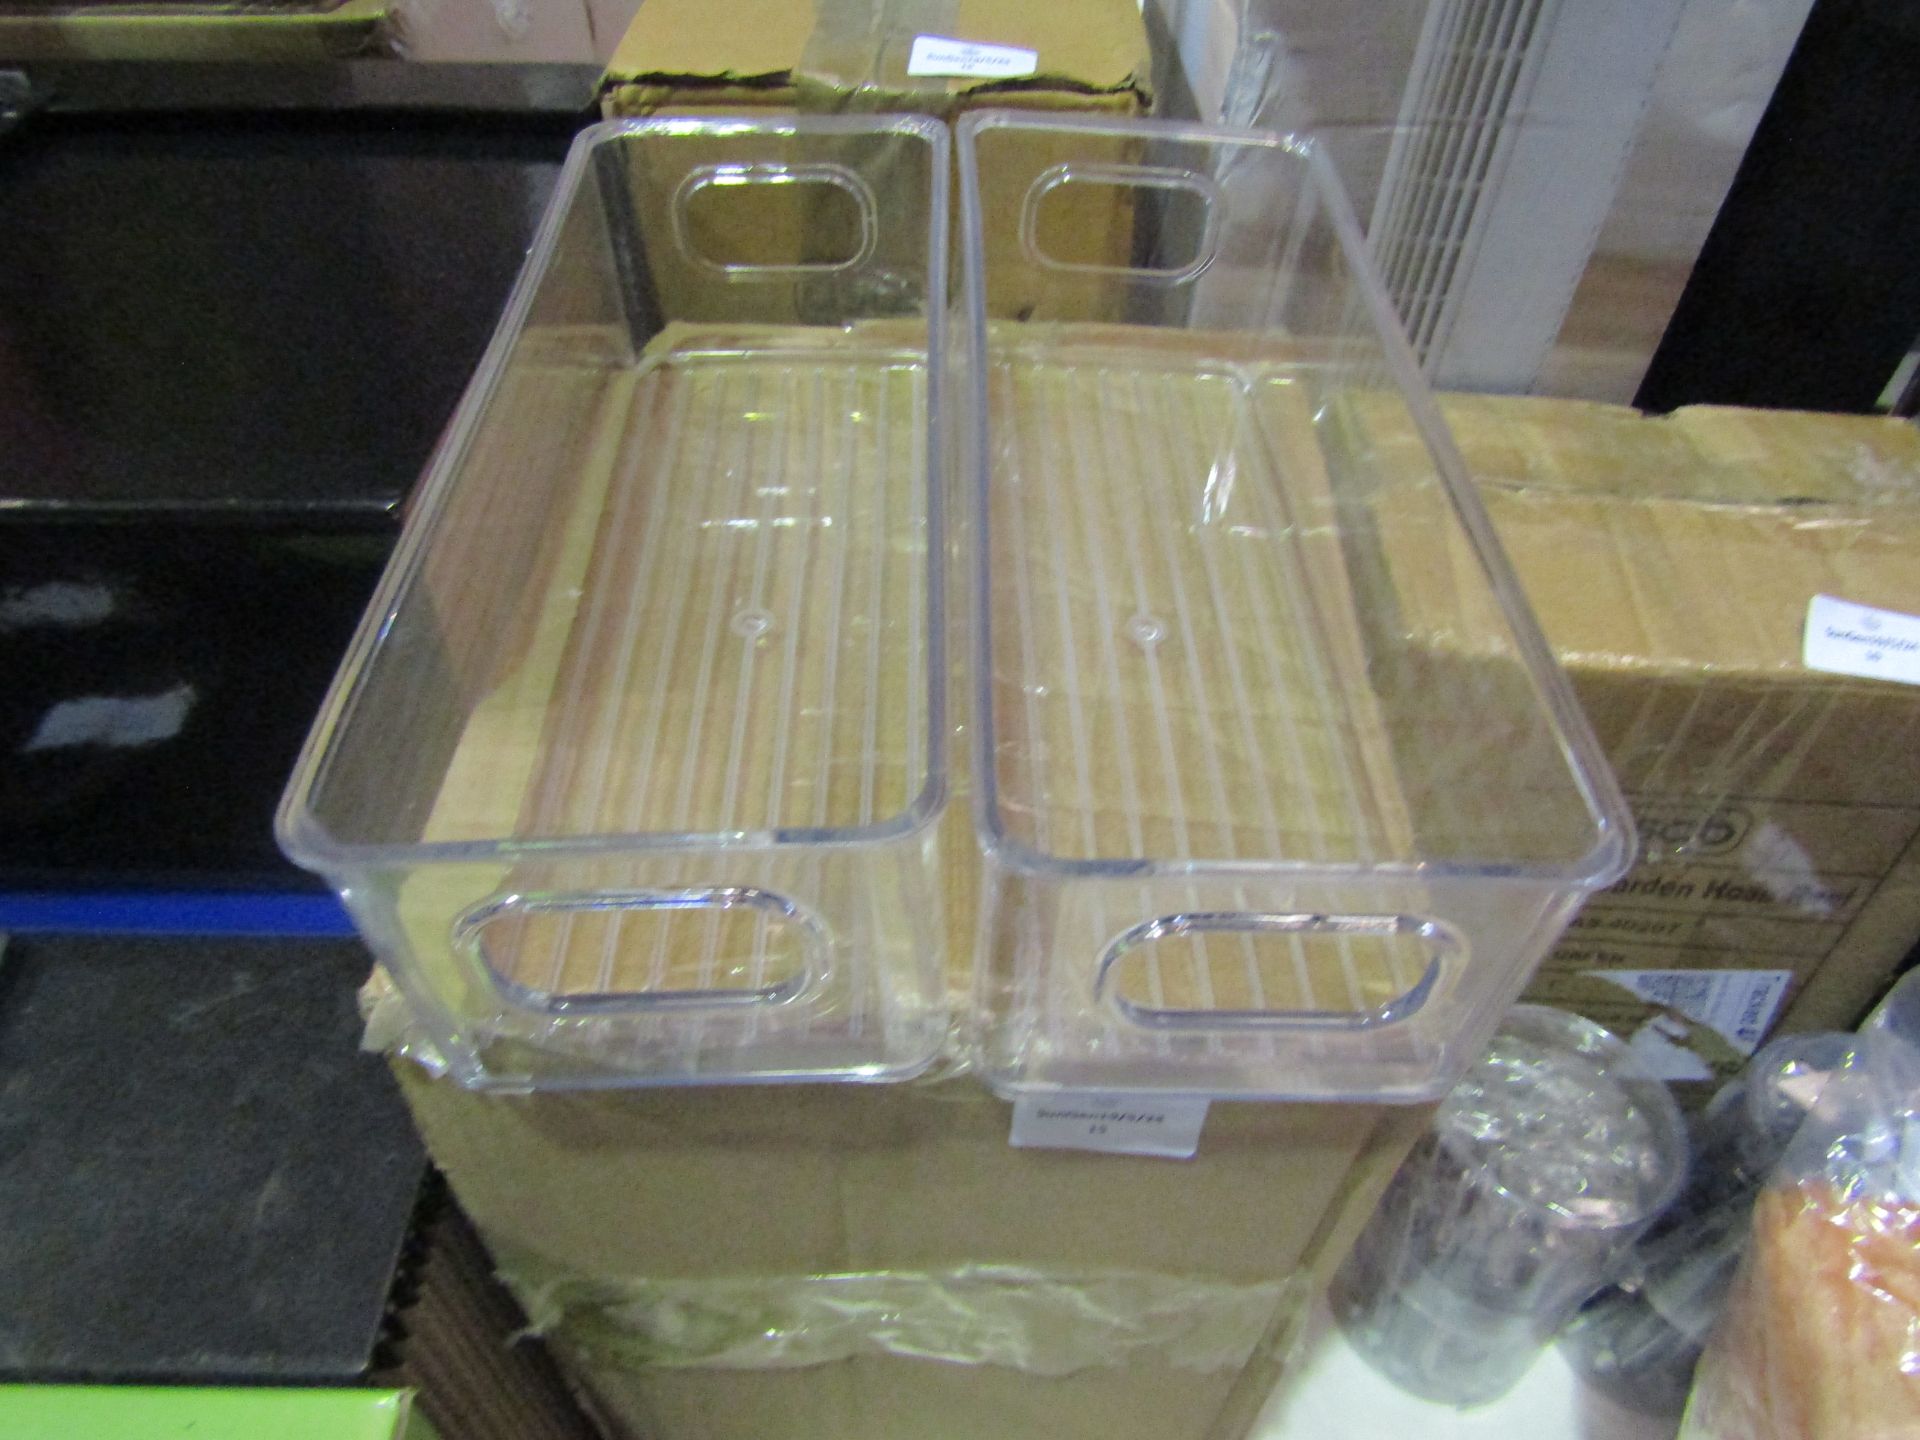 Asab 14pc Plastic Drawer Organiser Trays, Unchecked & Boxed.